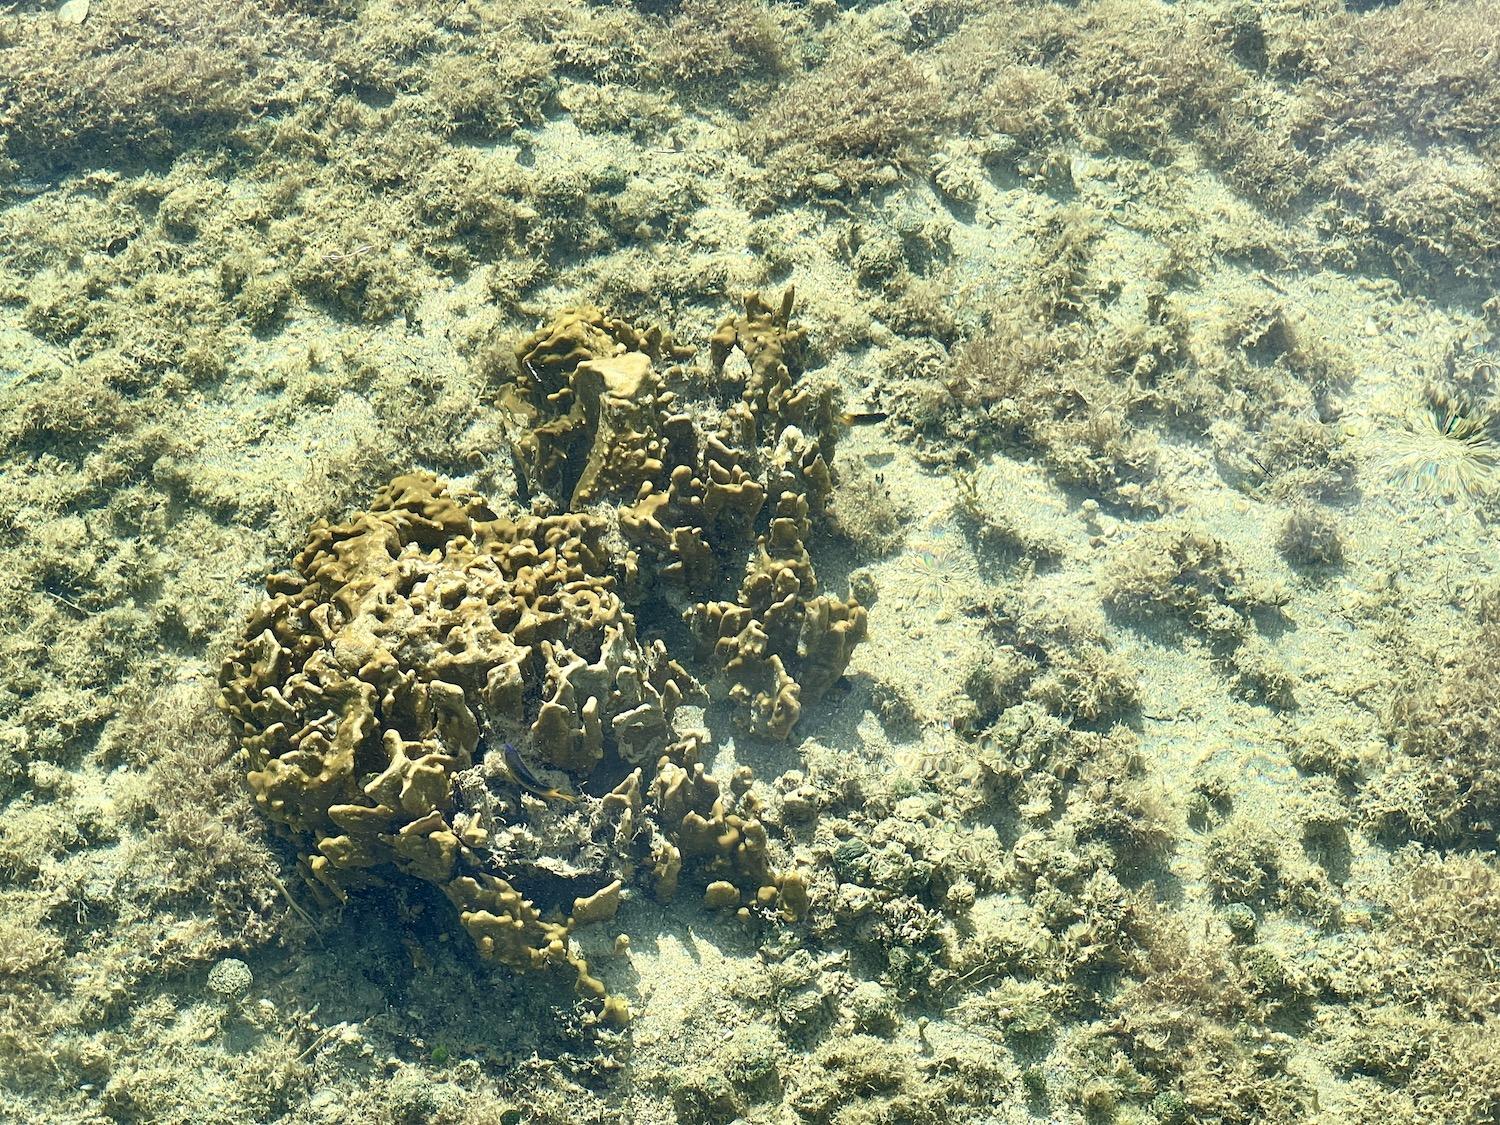 You can see lesser star coral in the clear, shallow water at Bonefish Pond National Park.